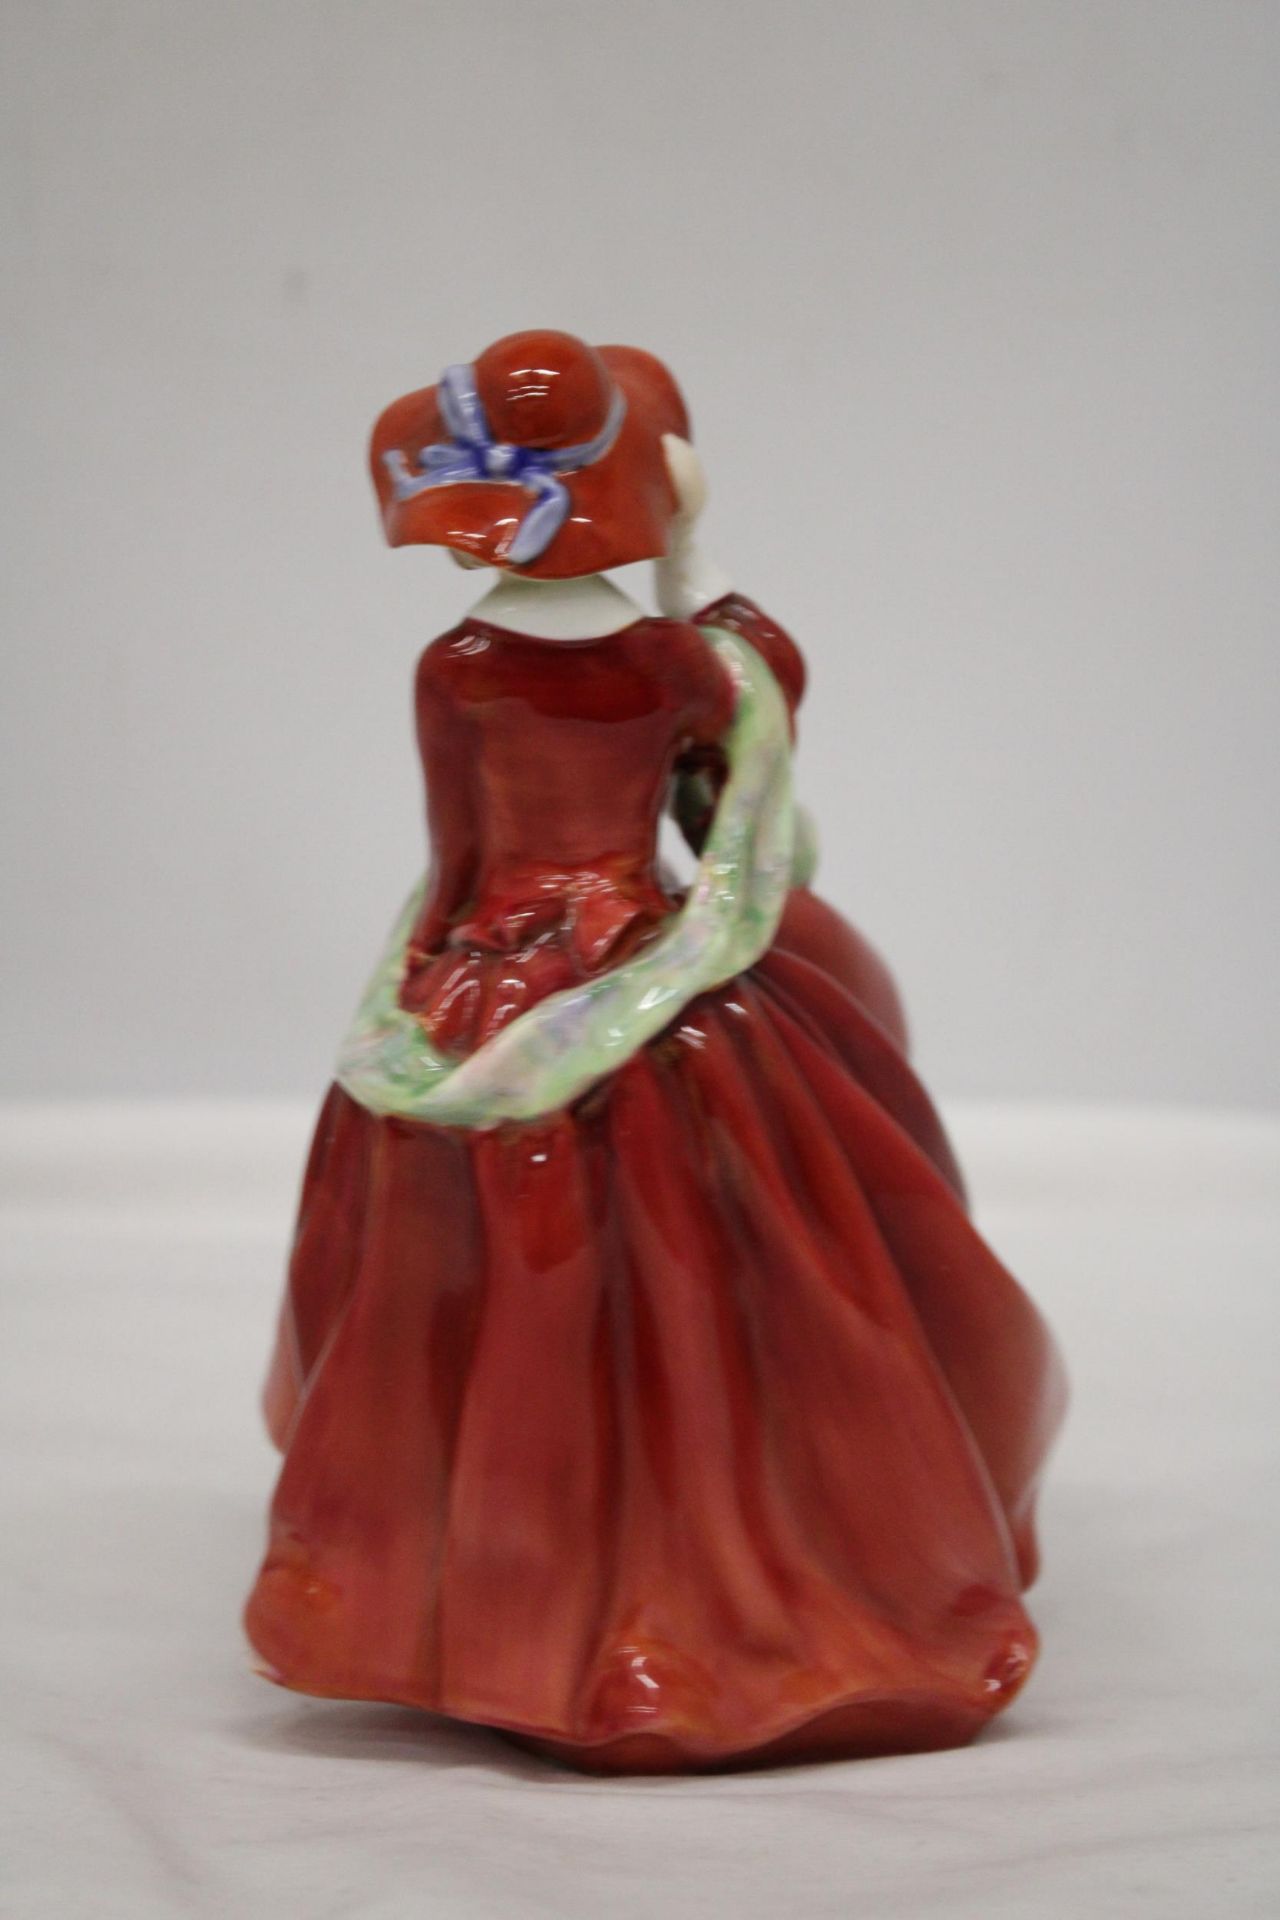 A ROYAL DOULTON FIGURE "TOP OF THE HILL" HN 1834 - Image 3 of 6